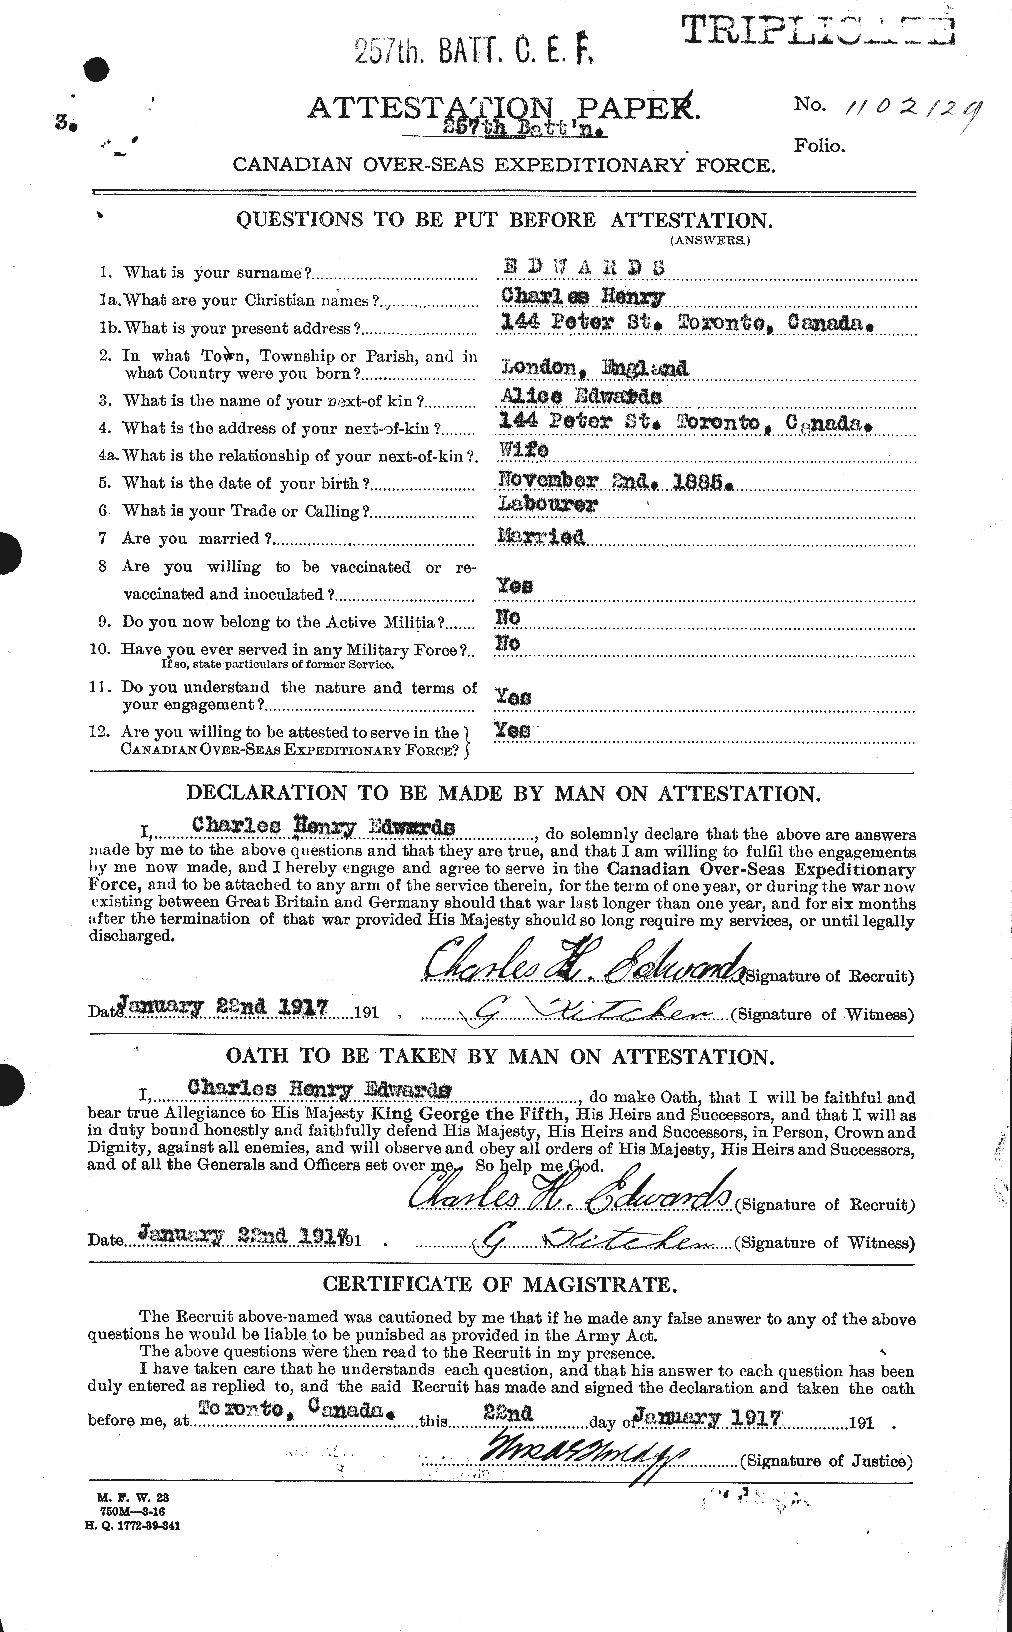 Personnel Records of the First World War - CEF 307843a